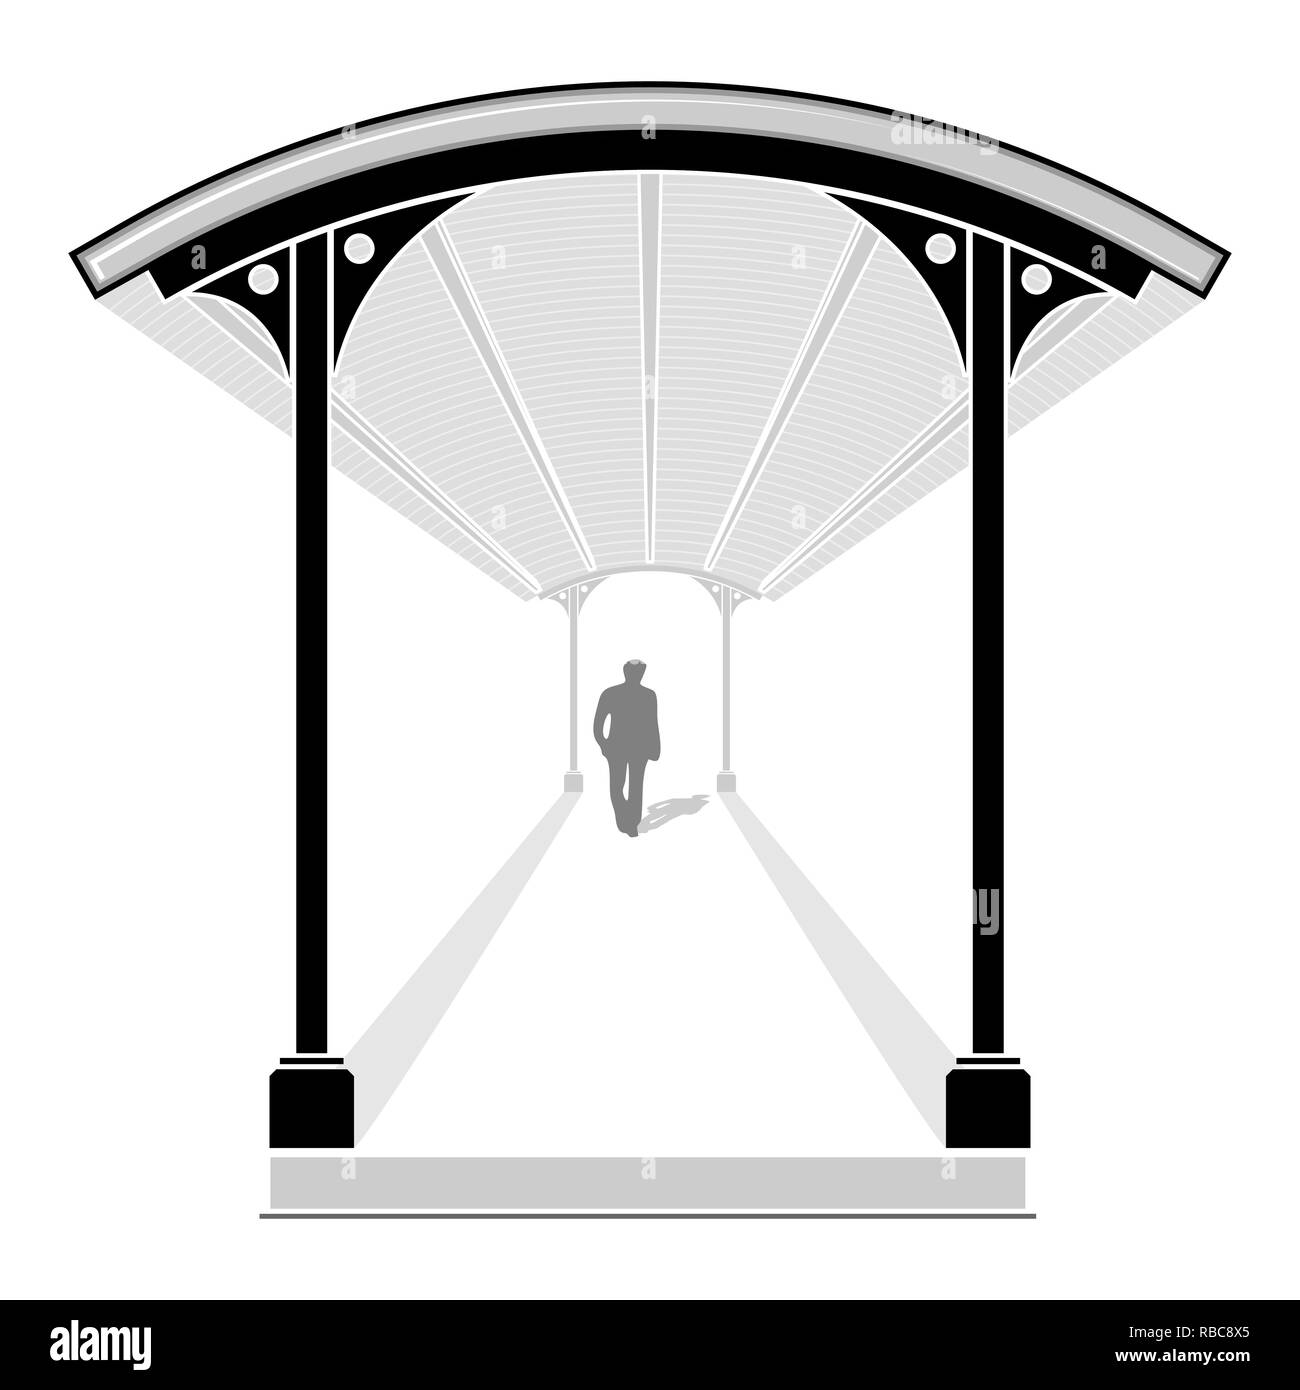 Silhouette of human walking in covered walkway with leading lines, vector illustration Stock Vector